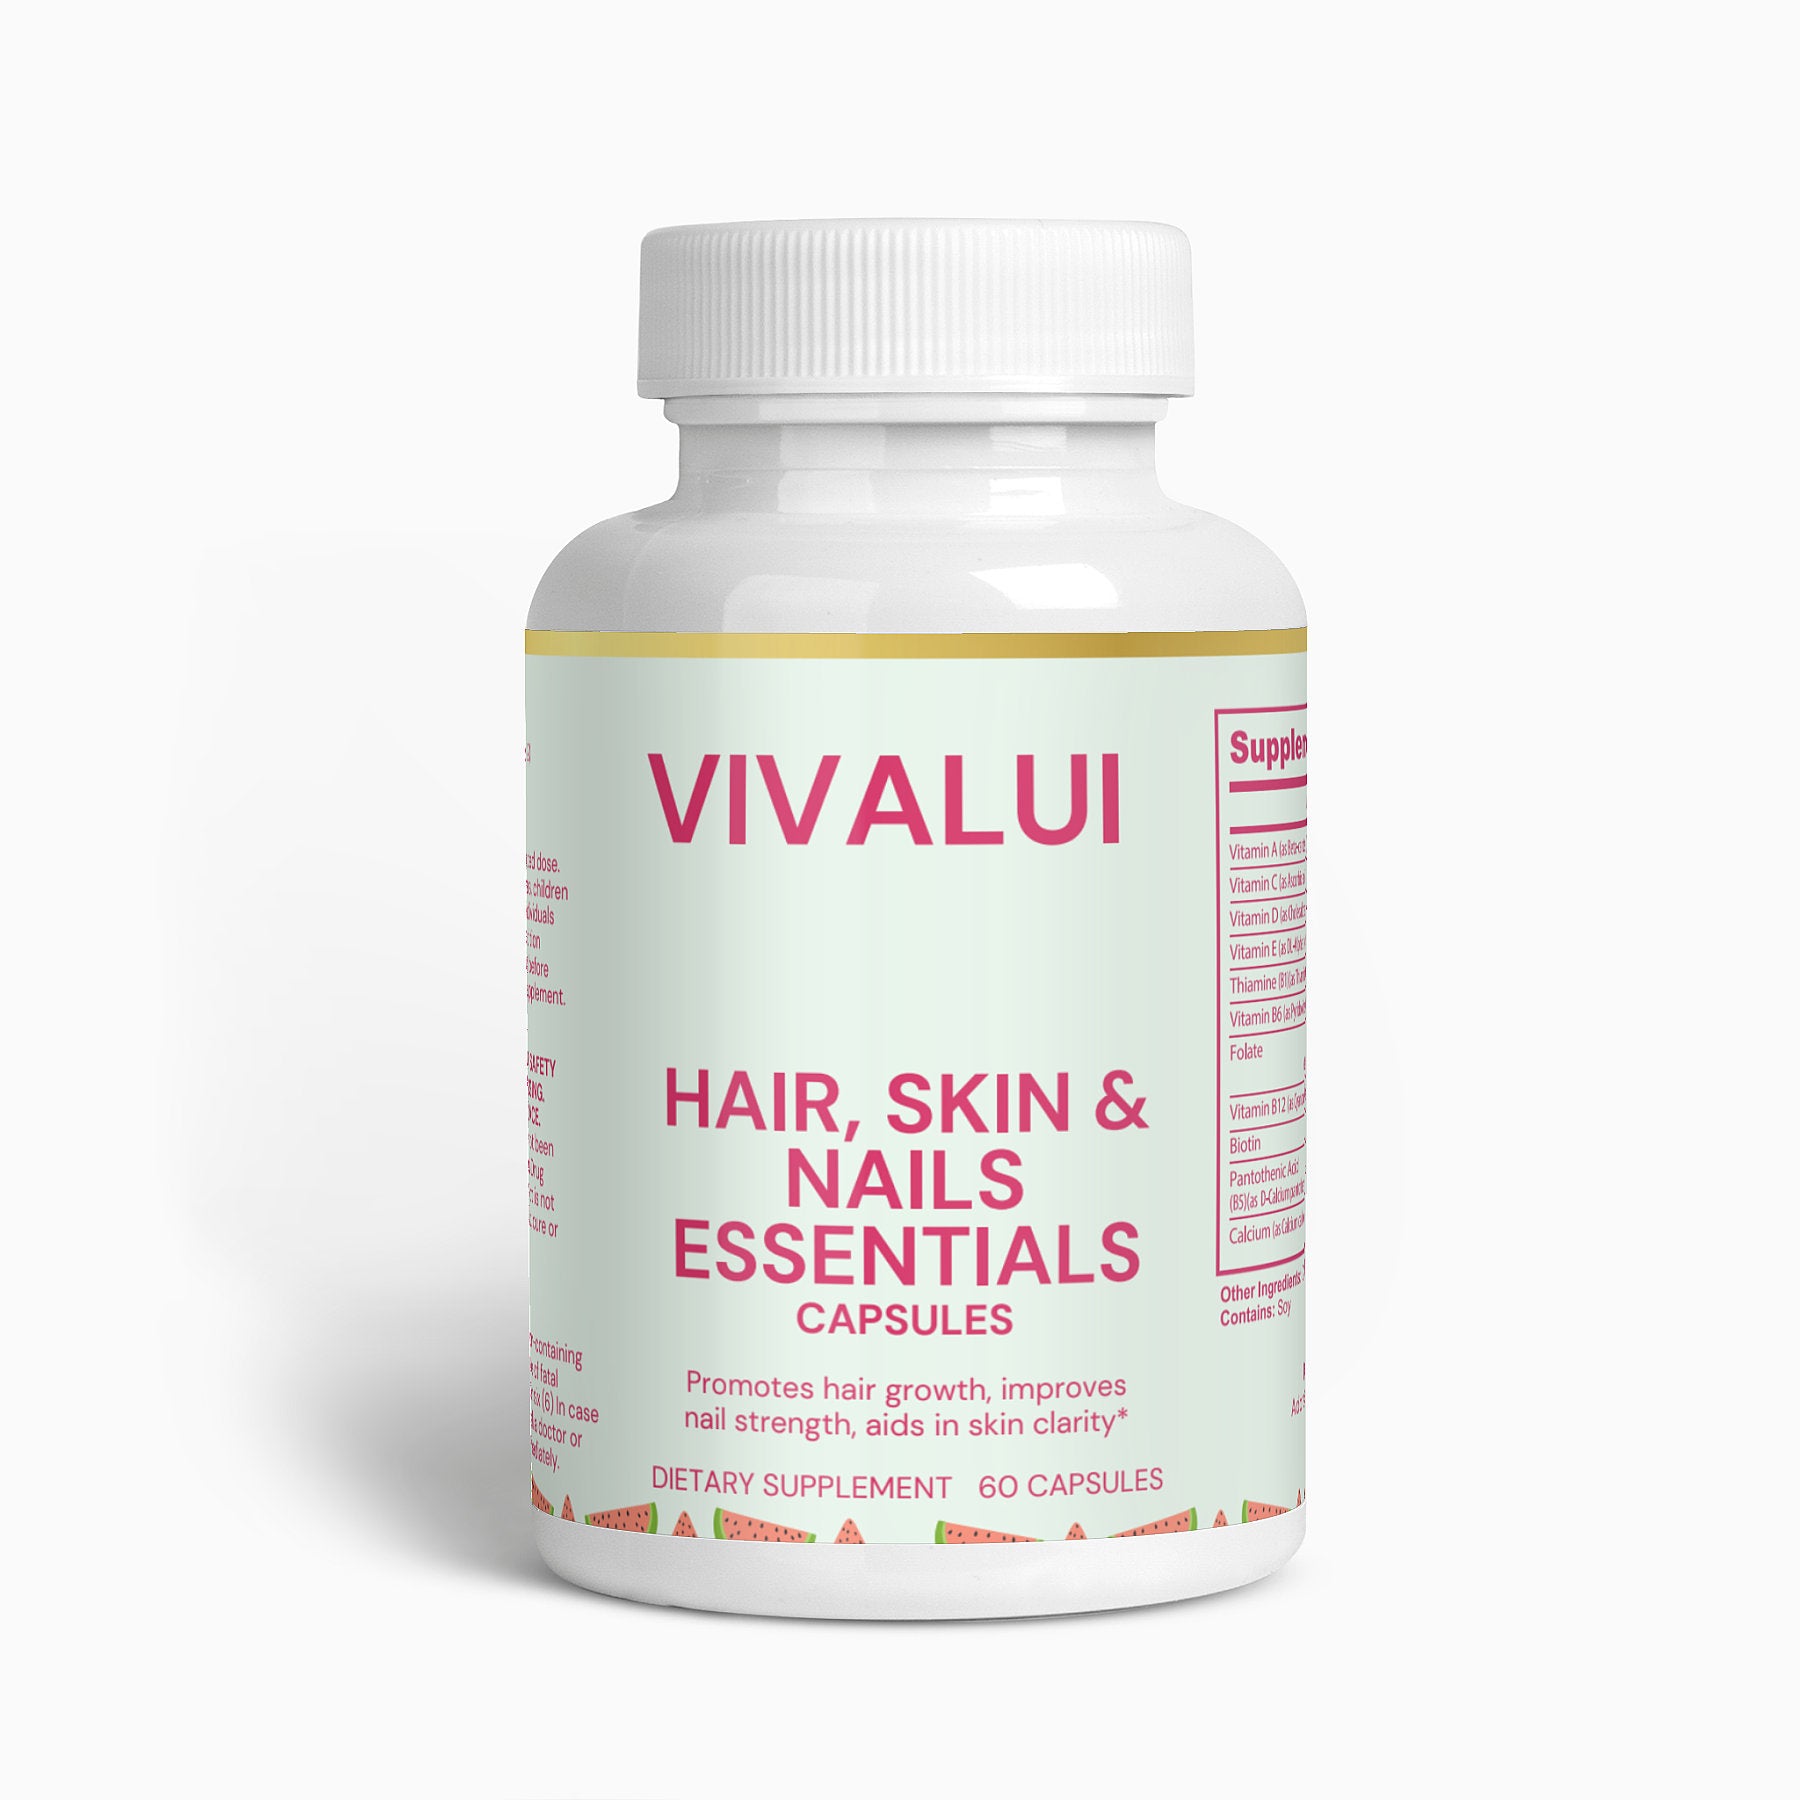 Vivalui Hair, Skin and Nails Boost